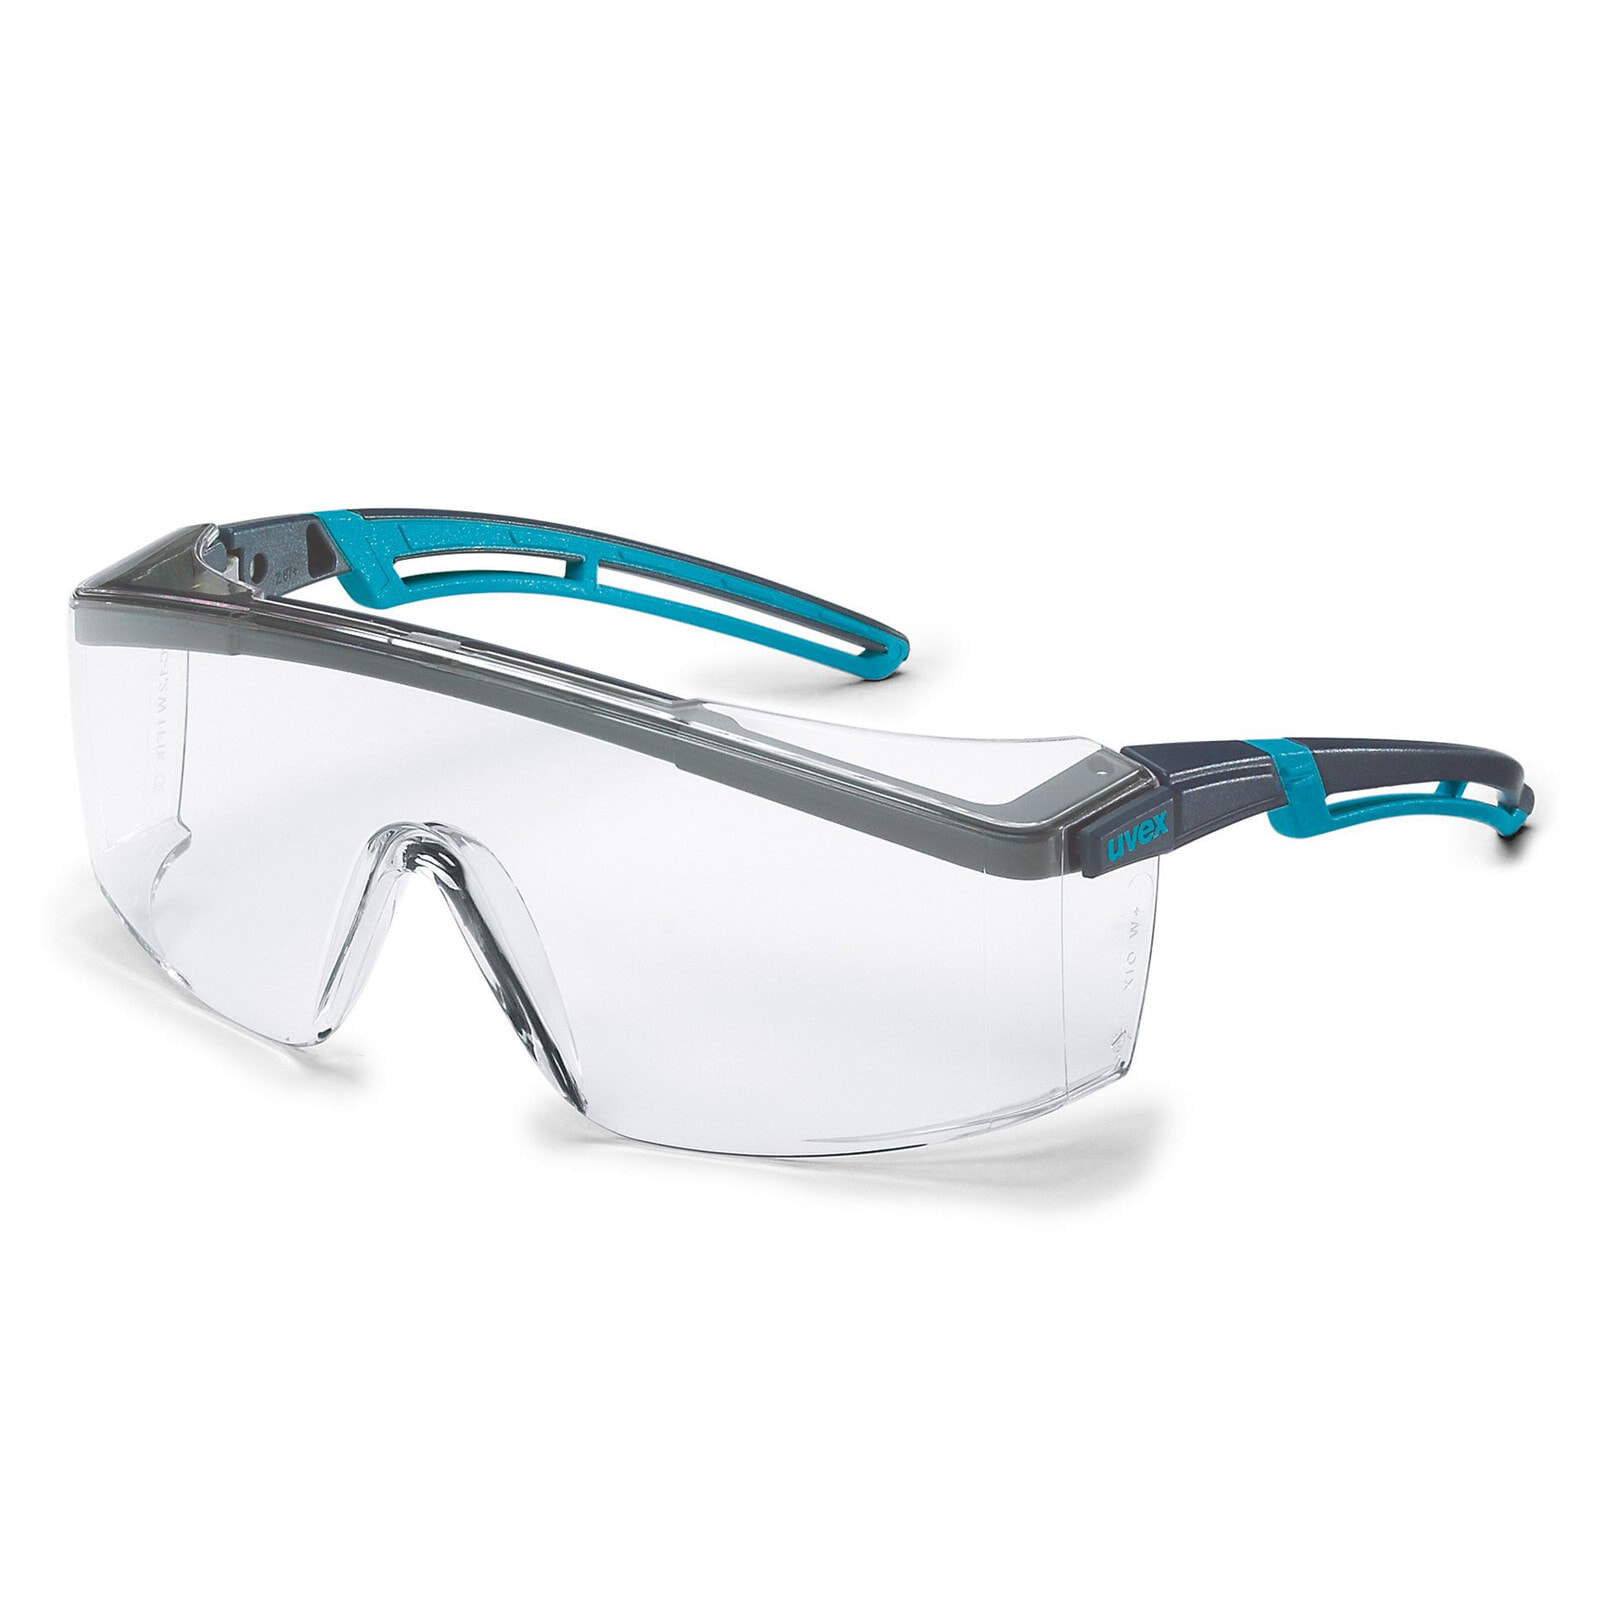 UVEX Arbeitsschutz 9164275 - Safety glasses - Anthracite - Petrol - Polycarbonate - 1 pc(s)